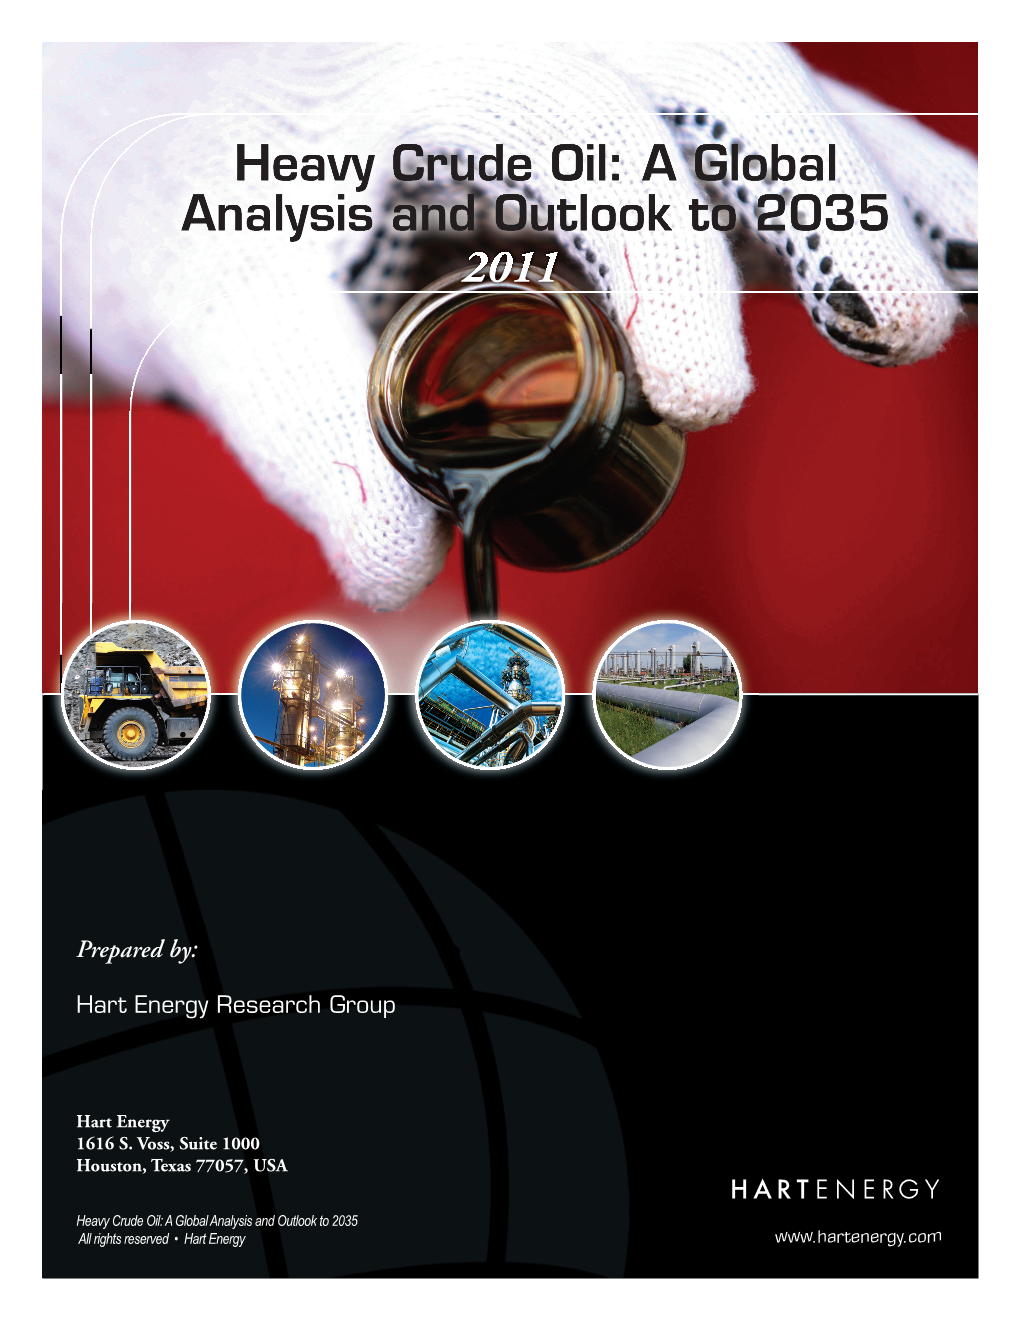 Heavy Crude Oil: a Global Analysis and Outlook to 2035 2011